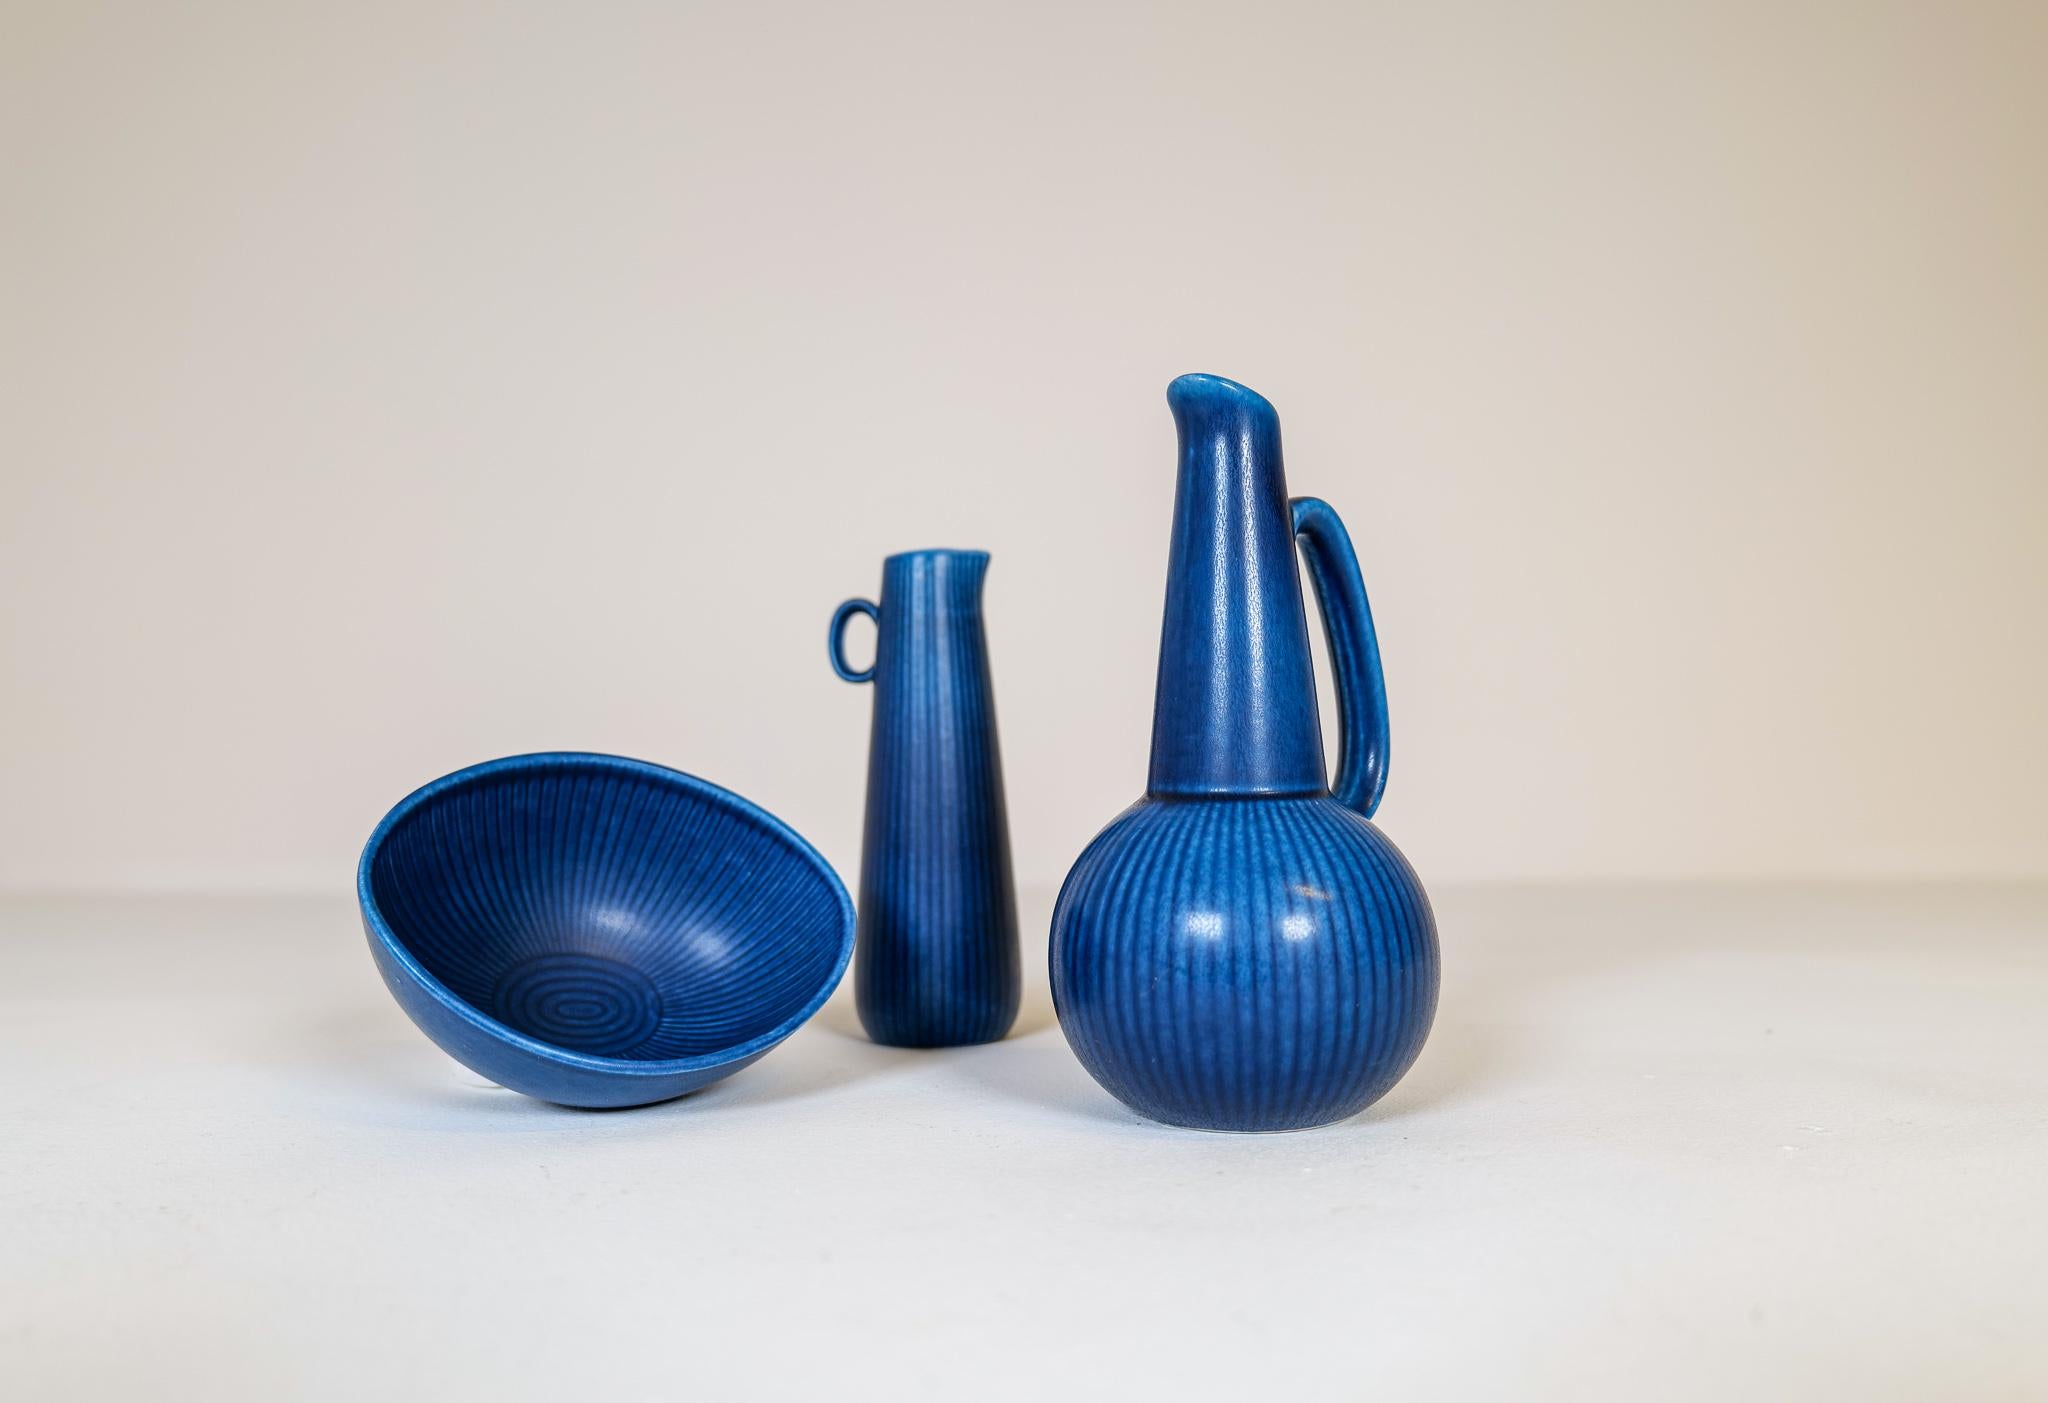 Wonderful blue glaze on these 2 vases and bowl from Rörstrand Sweden, designed by Gunnar Nylund in the 1950s.

They are all in good vintage condition. 

Dimensions: Large vase H 18 cm, D 6 cm. Bowl W 12 D 10 H 6.
 